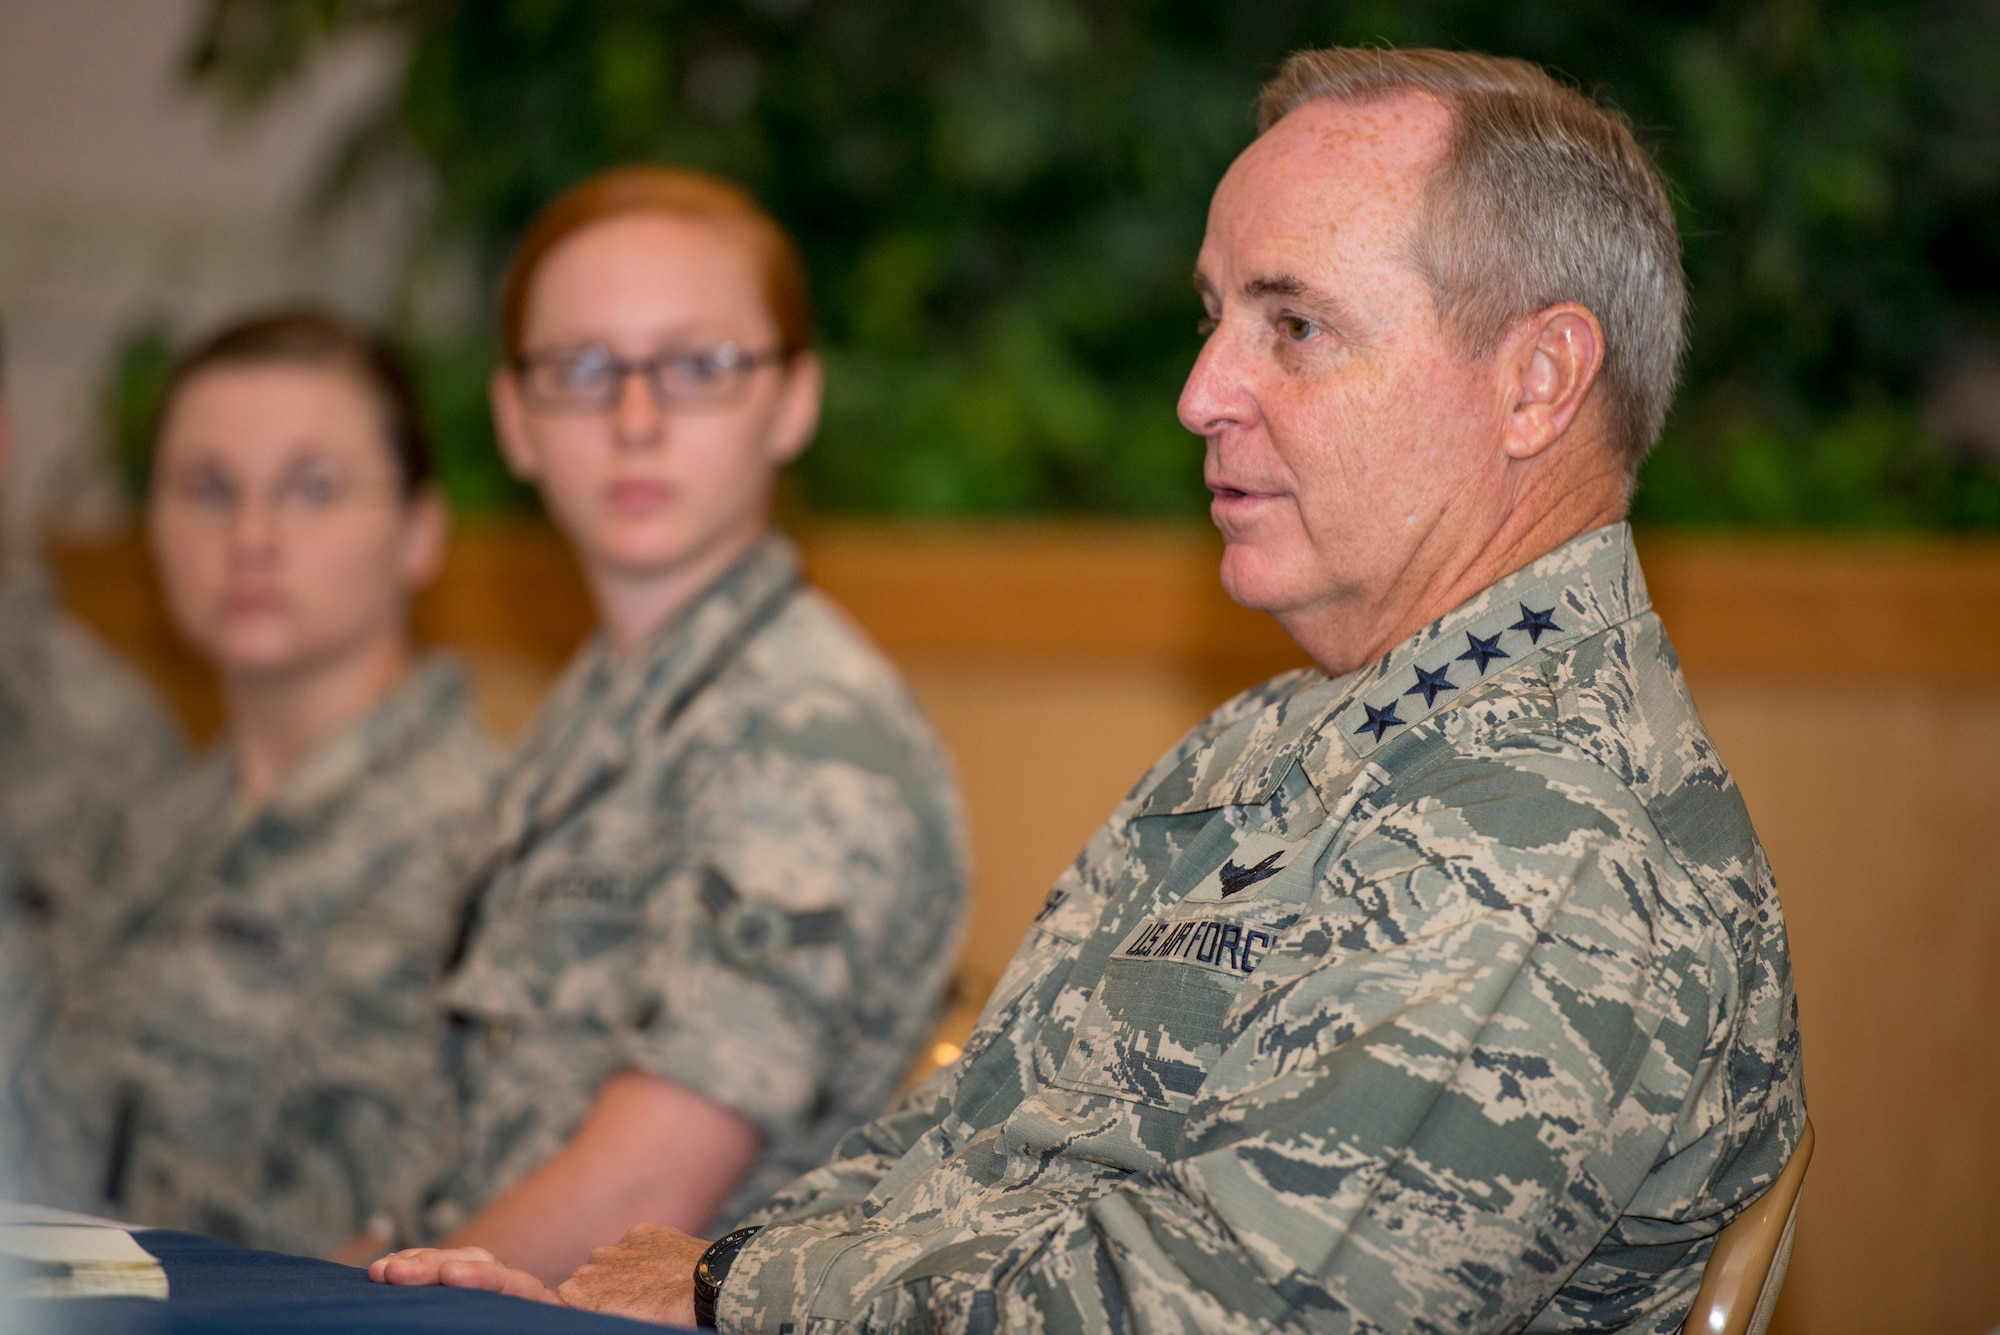 Air Force Chief of Staff Gen. Mark A. Welsh III talks with Airmen during a visit to the 5th Bomb Wing and 91st Missile Wing at Minot Air Force Base, N.D., Aug. 5, 2015.  While visiting the base, Welsh met with 5th Bomb Wing and 91st Missile Wing maintainers, members of security force units and senior staff in an effort to gain perspective on the current status of the nuclear enterprise. (U.S. Air Force photo/Airman 1st Class Justin T. Armstrong)